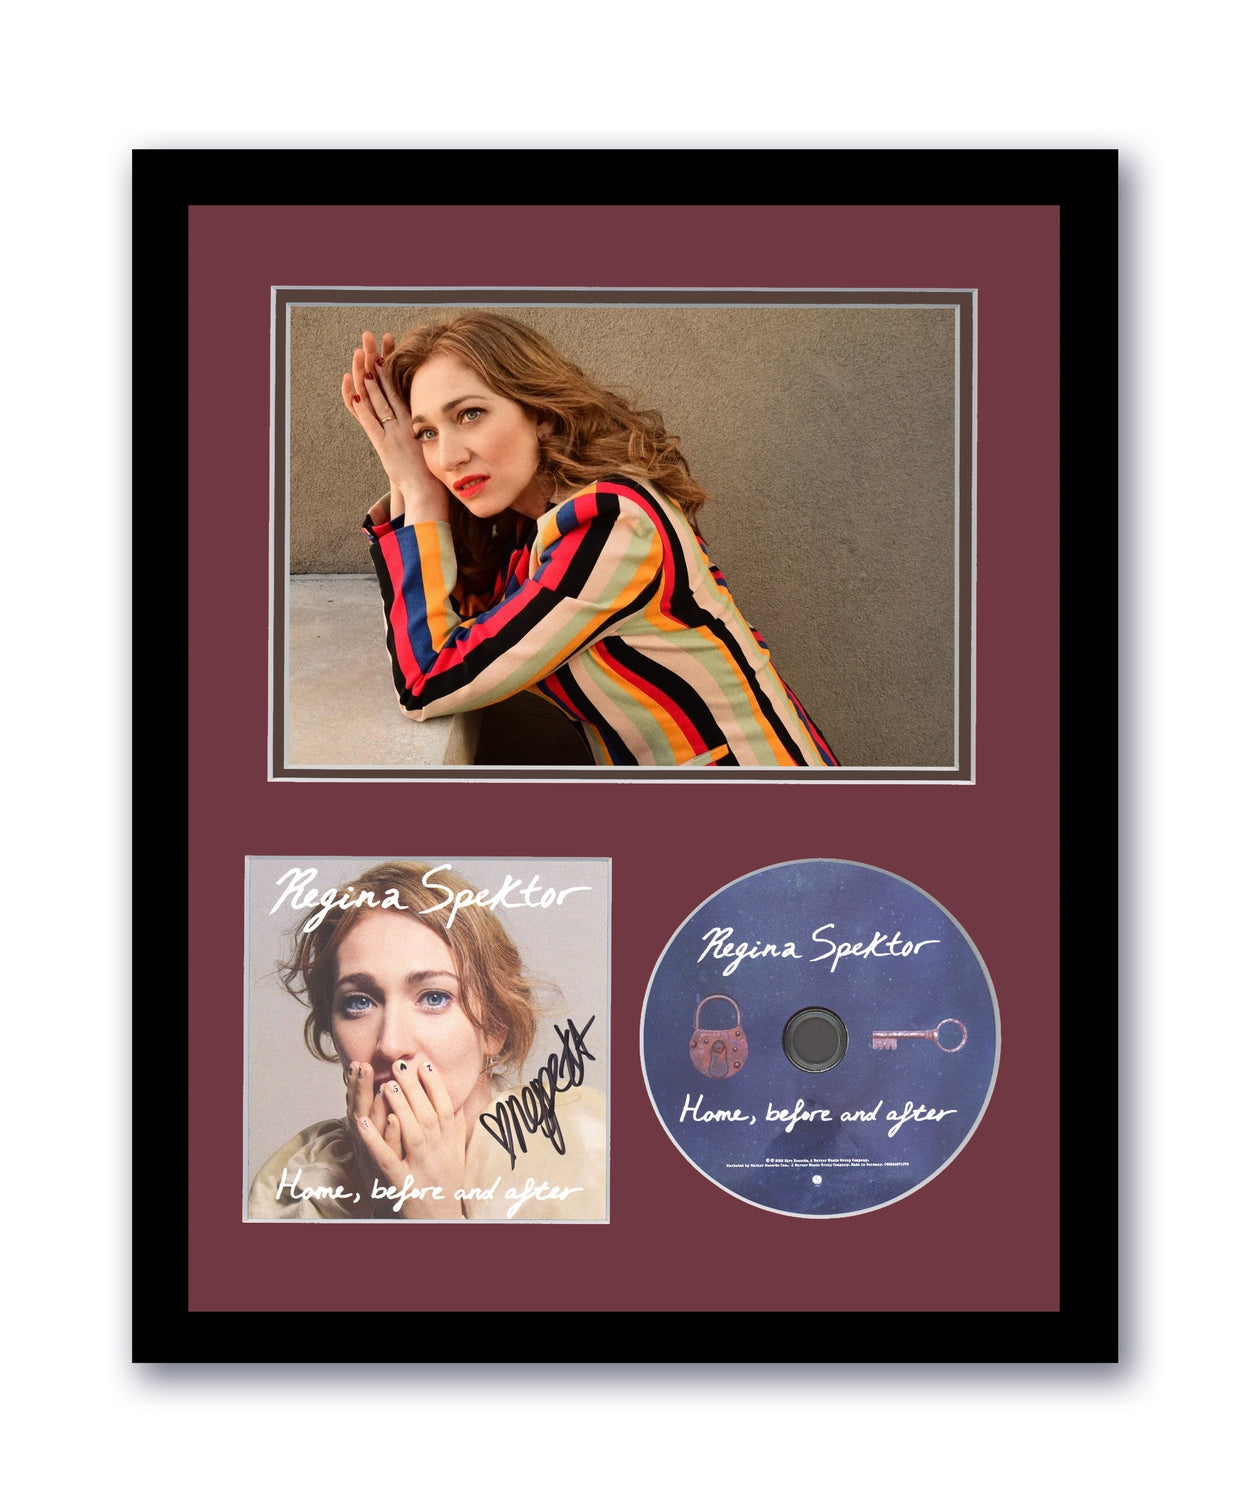 Regina Spektor Signed 11x14 Framed CD Home, before and after Autographed ACOA 6